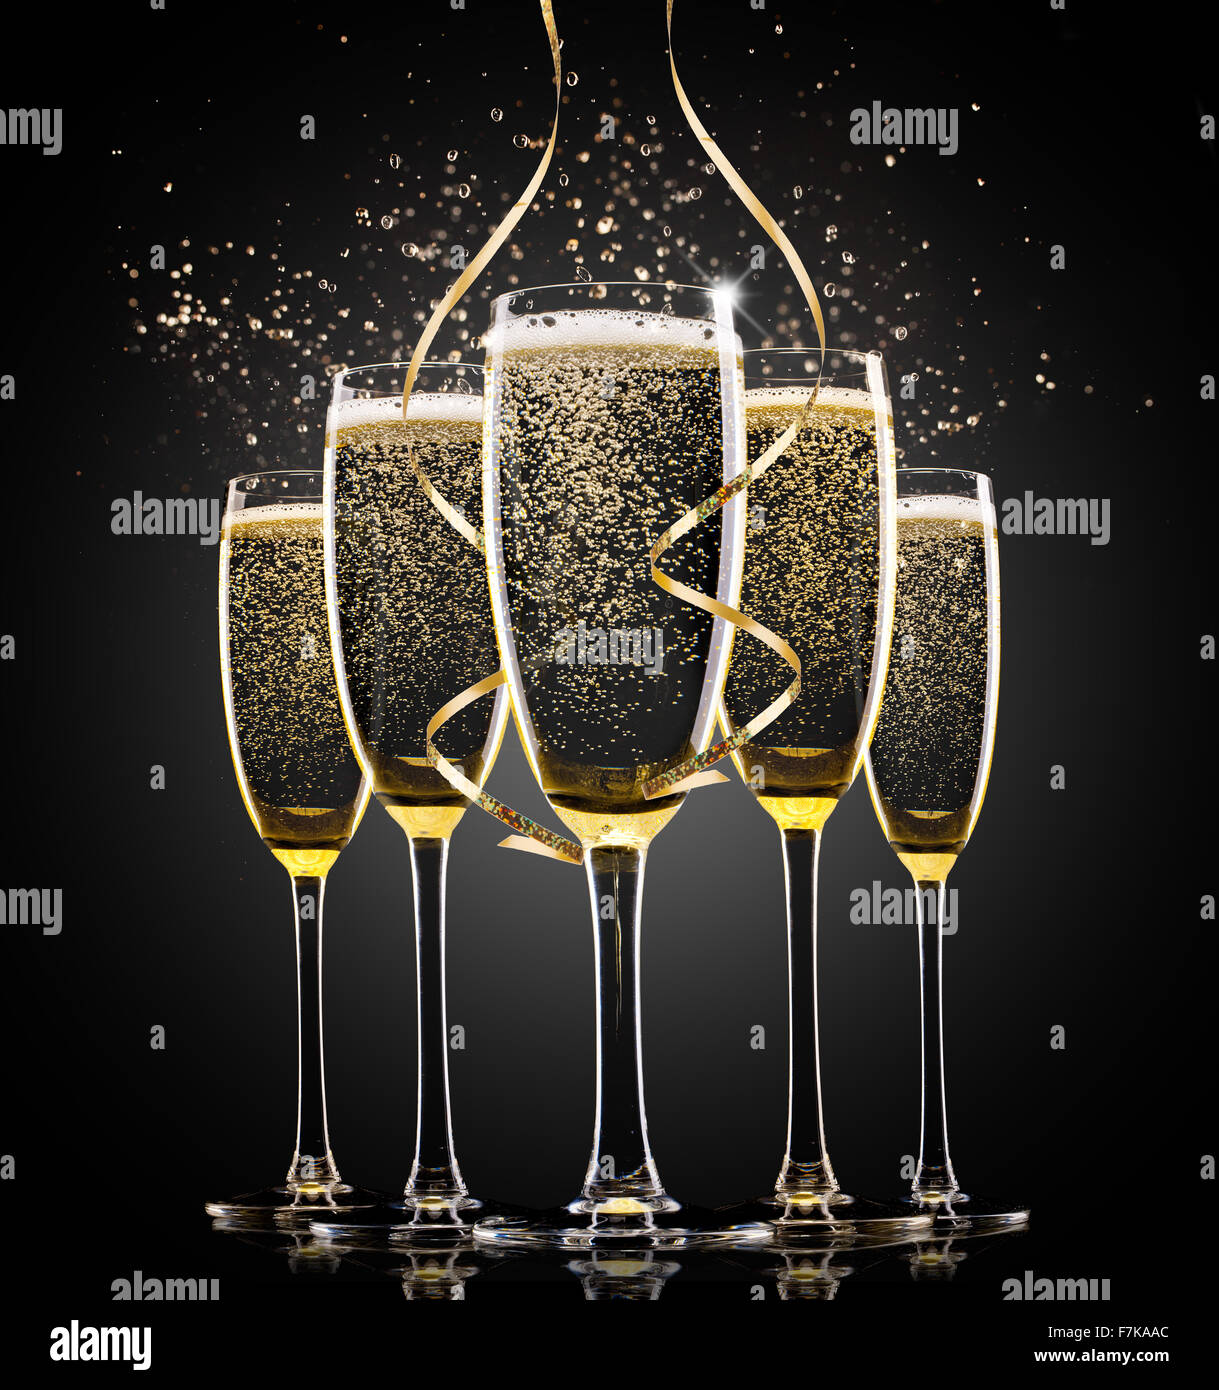 glasses of champagne on a black background. Stock Photo